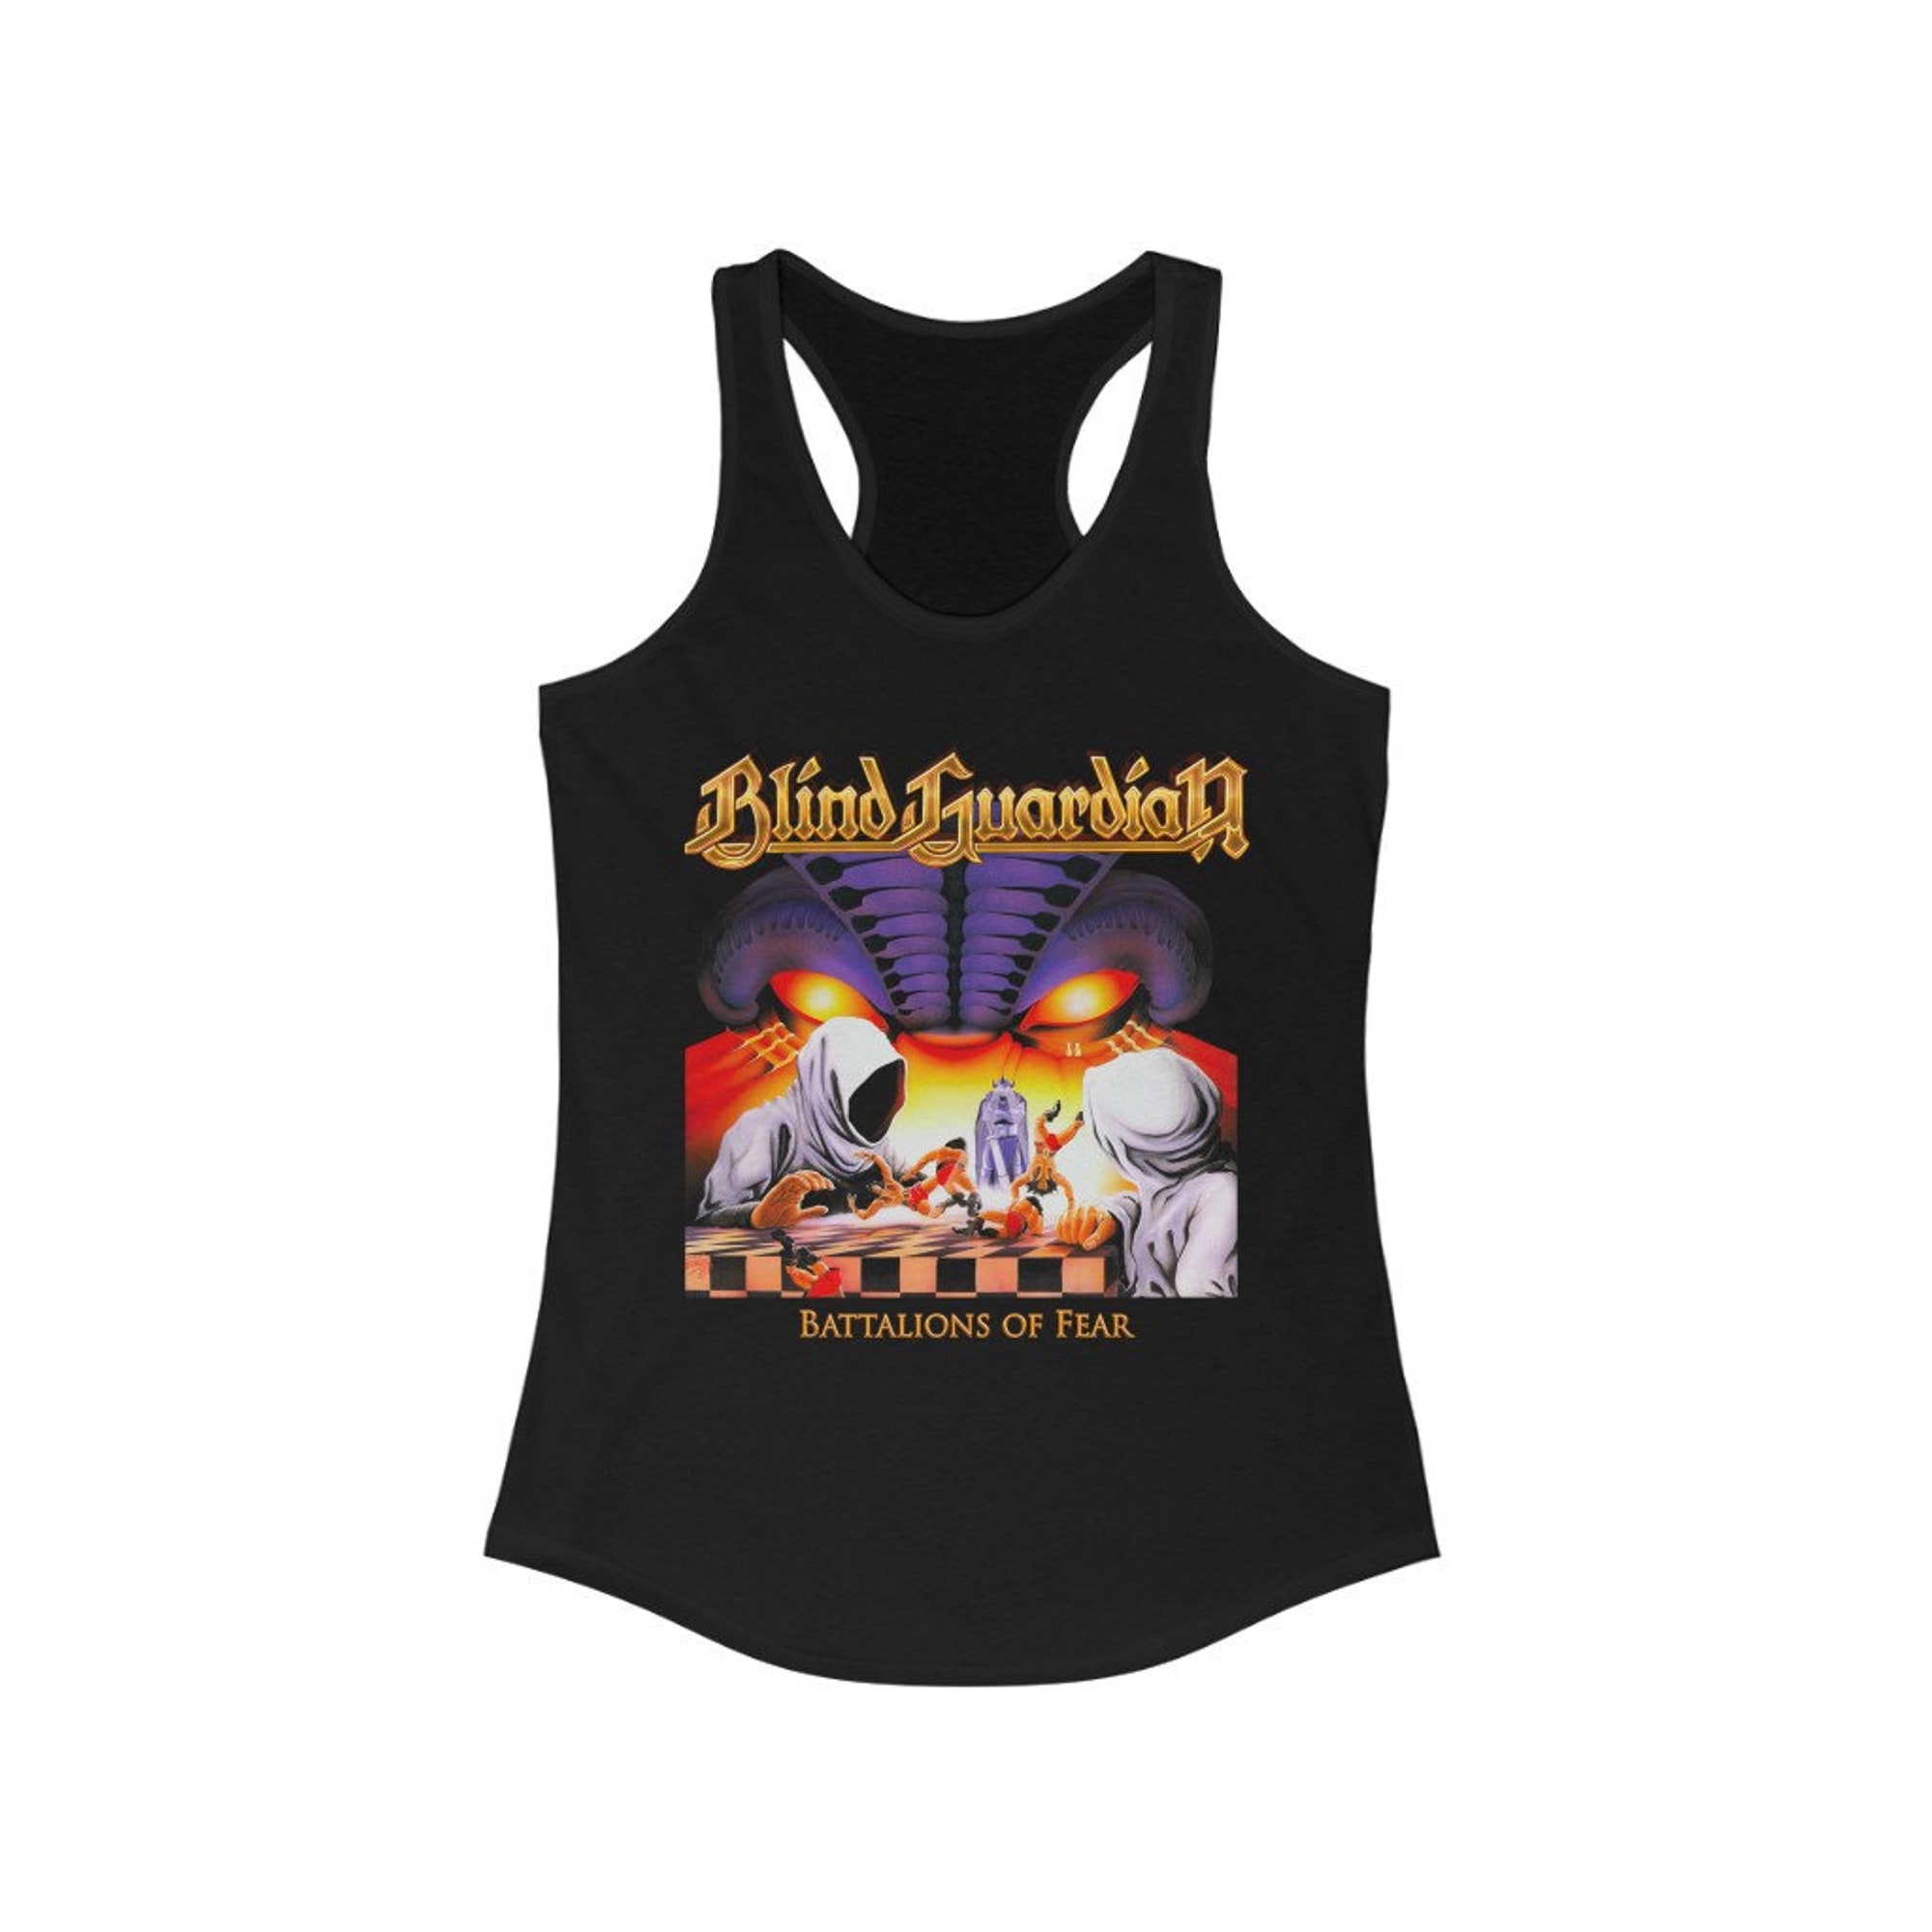 Discover Blind Guardian Sleeveless Tee - Battalions of Fear Womens Tank Top